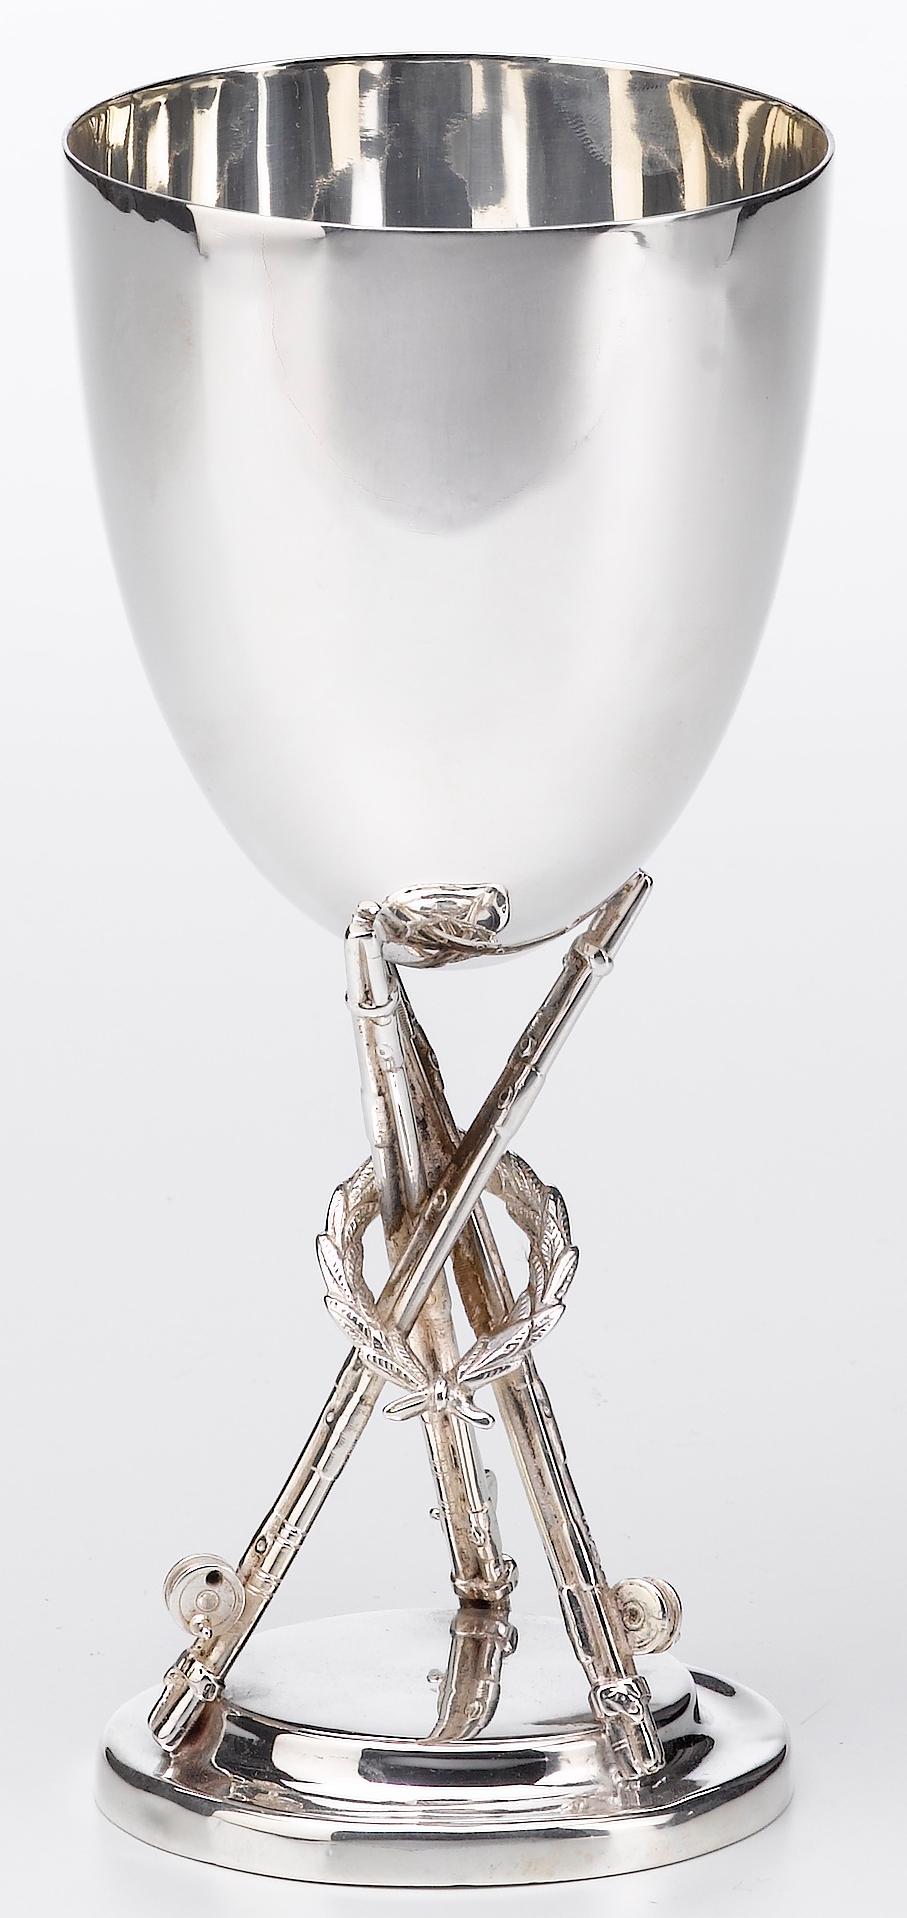 This silver trophy was designed to celebrate the winner of an angling competition. Three fishing rods with large reels intersect over one another, forming a three-pronged base for the trophy. Looped onto the rods is a wreath, signifying victory for